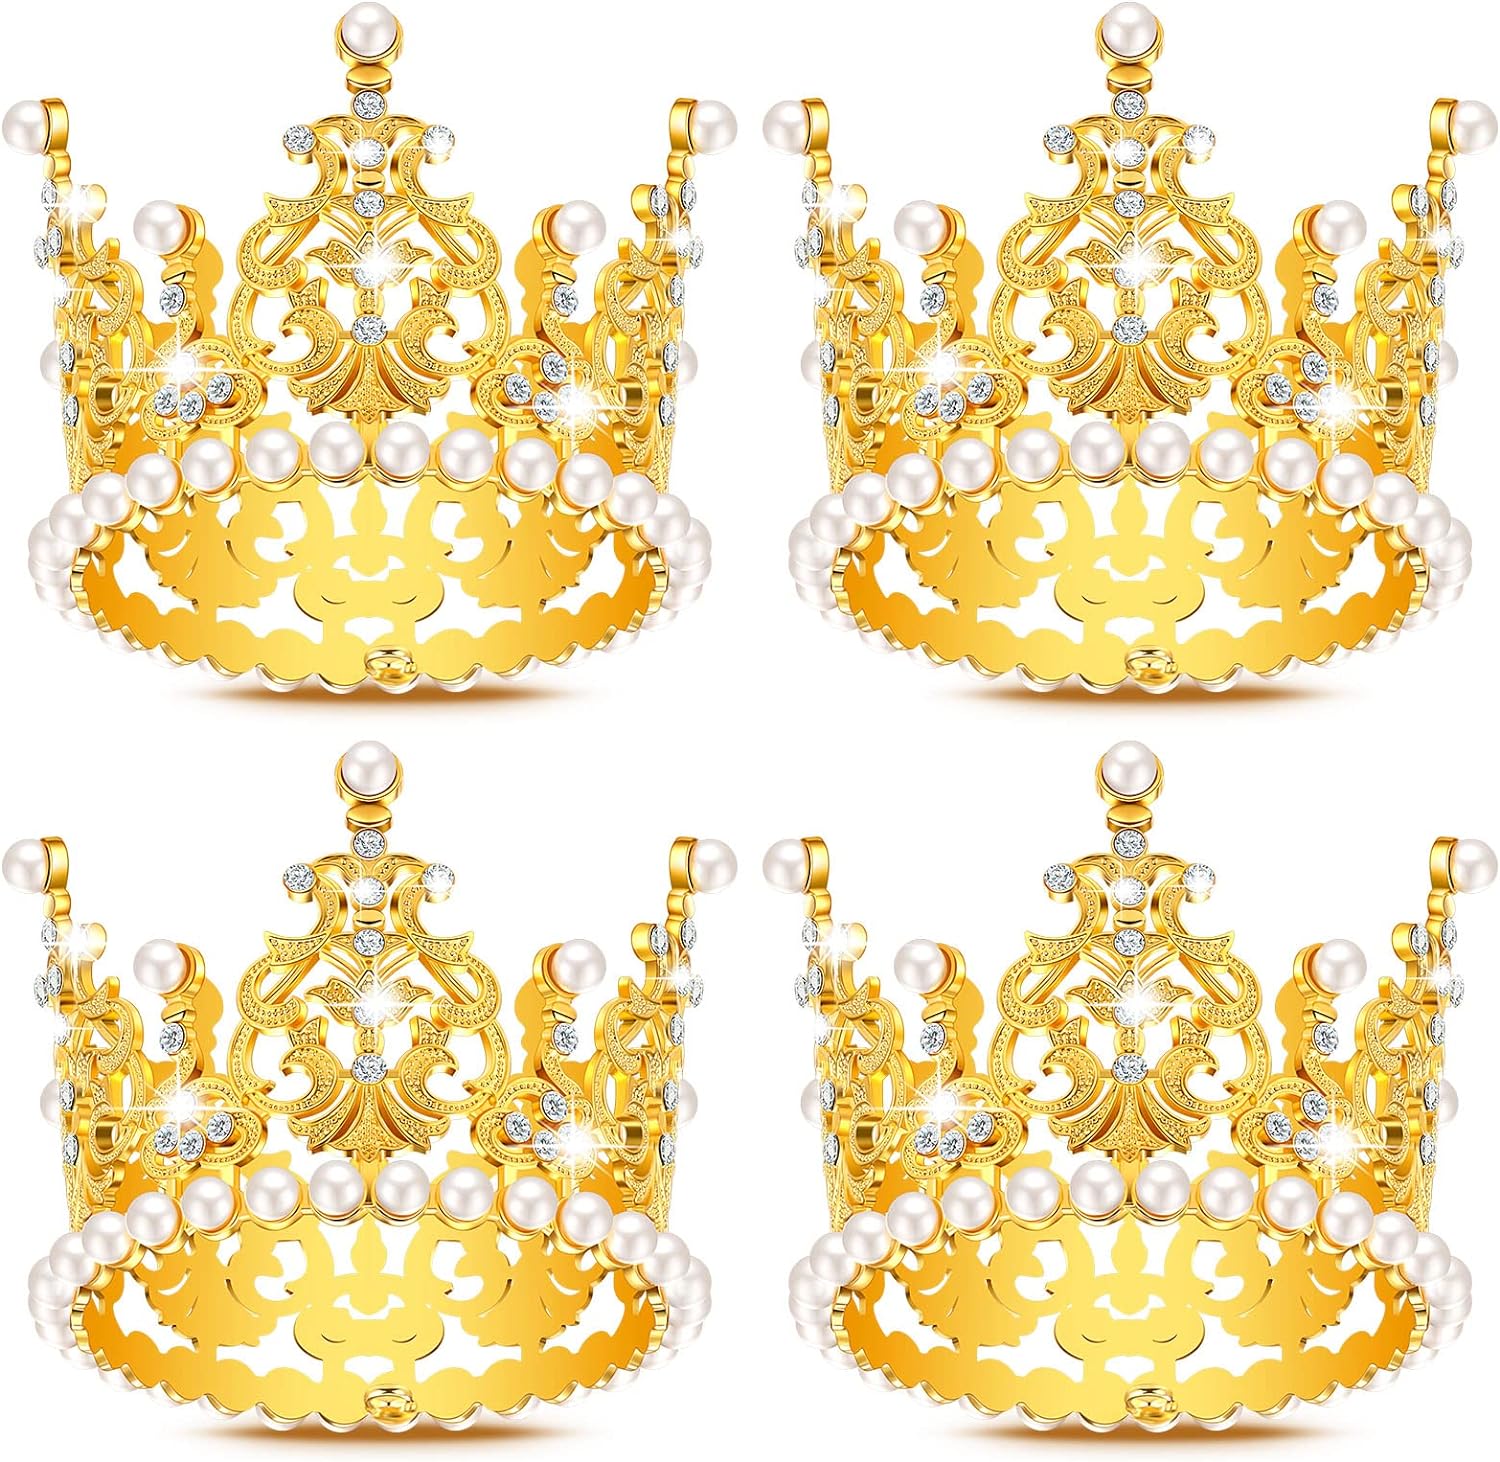 Gold (Large) Crown for Bouquets - Pack of 12